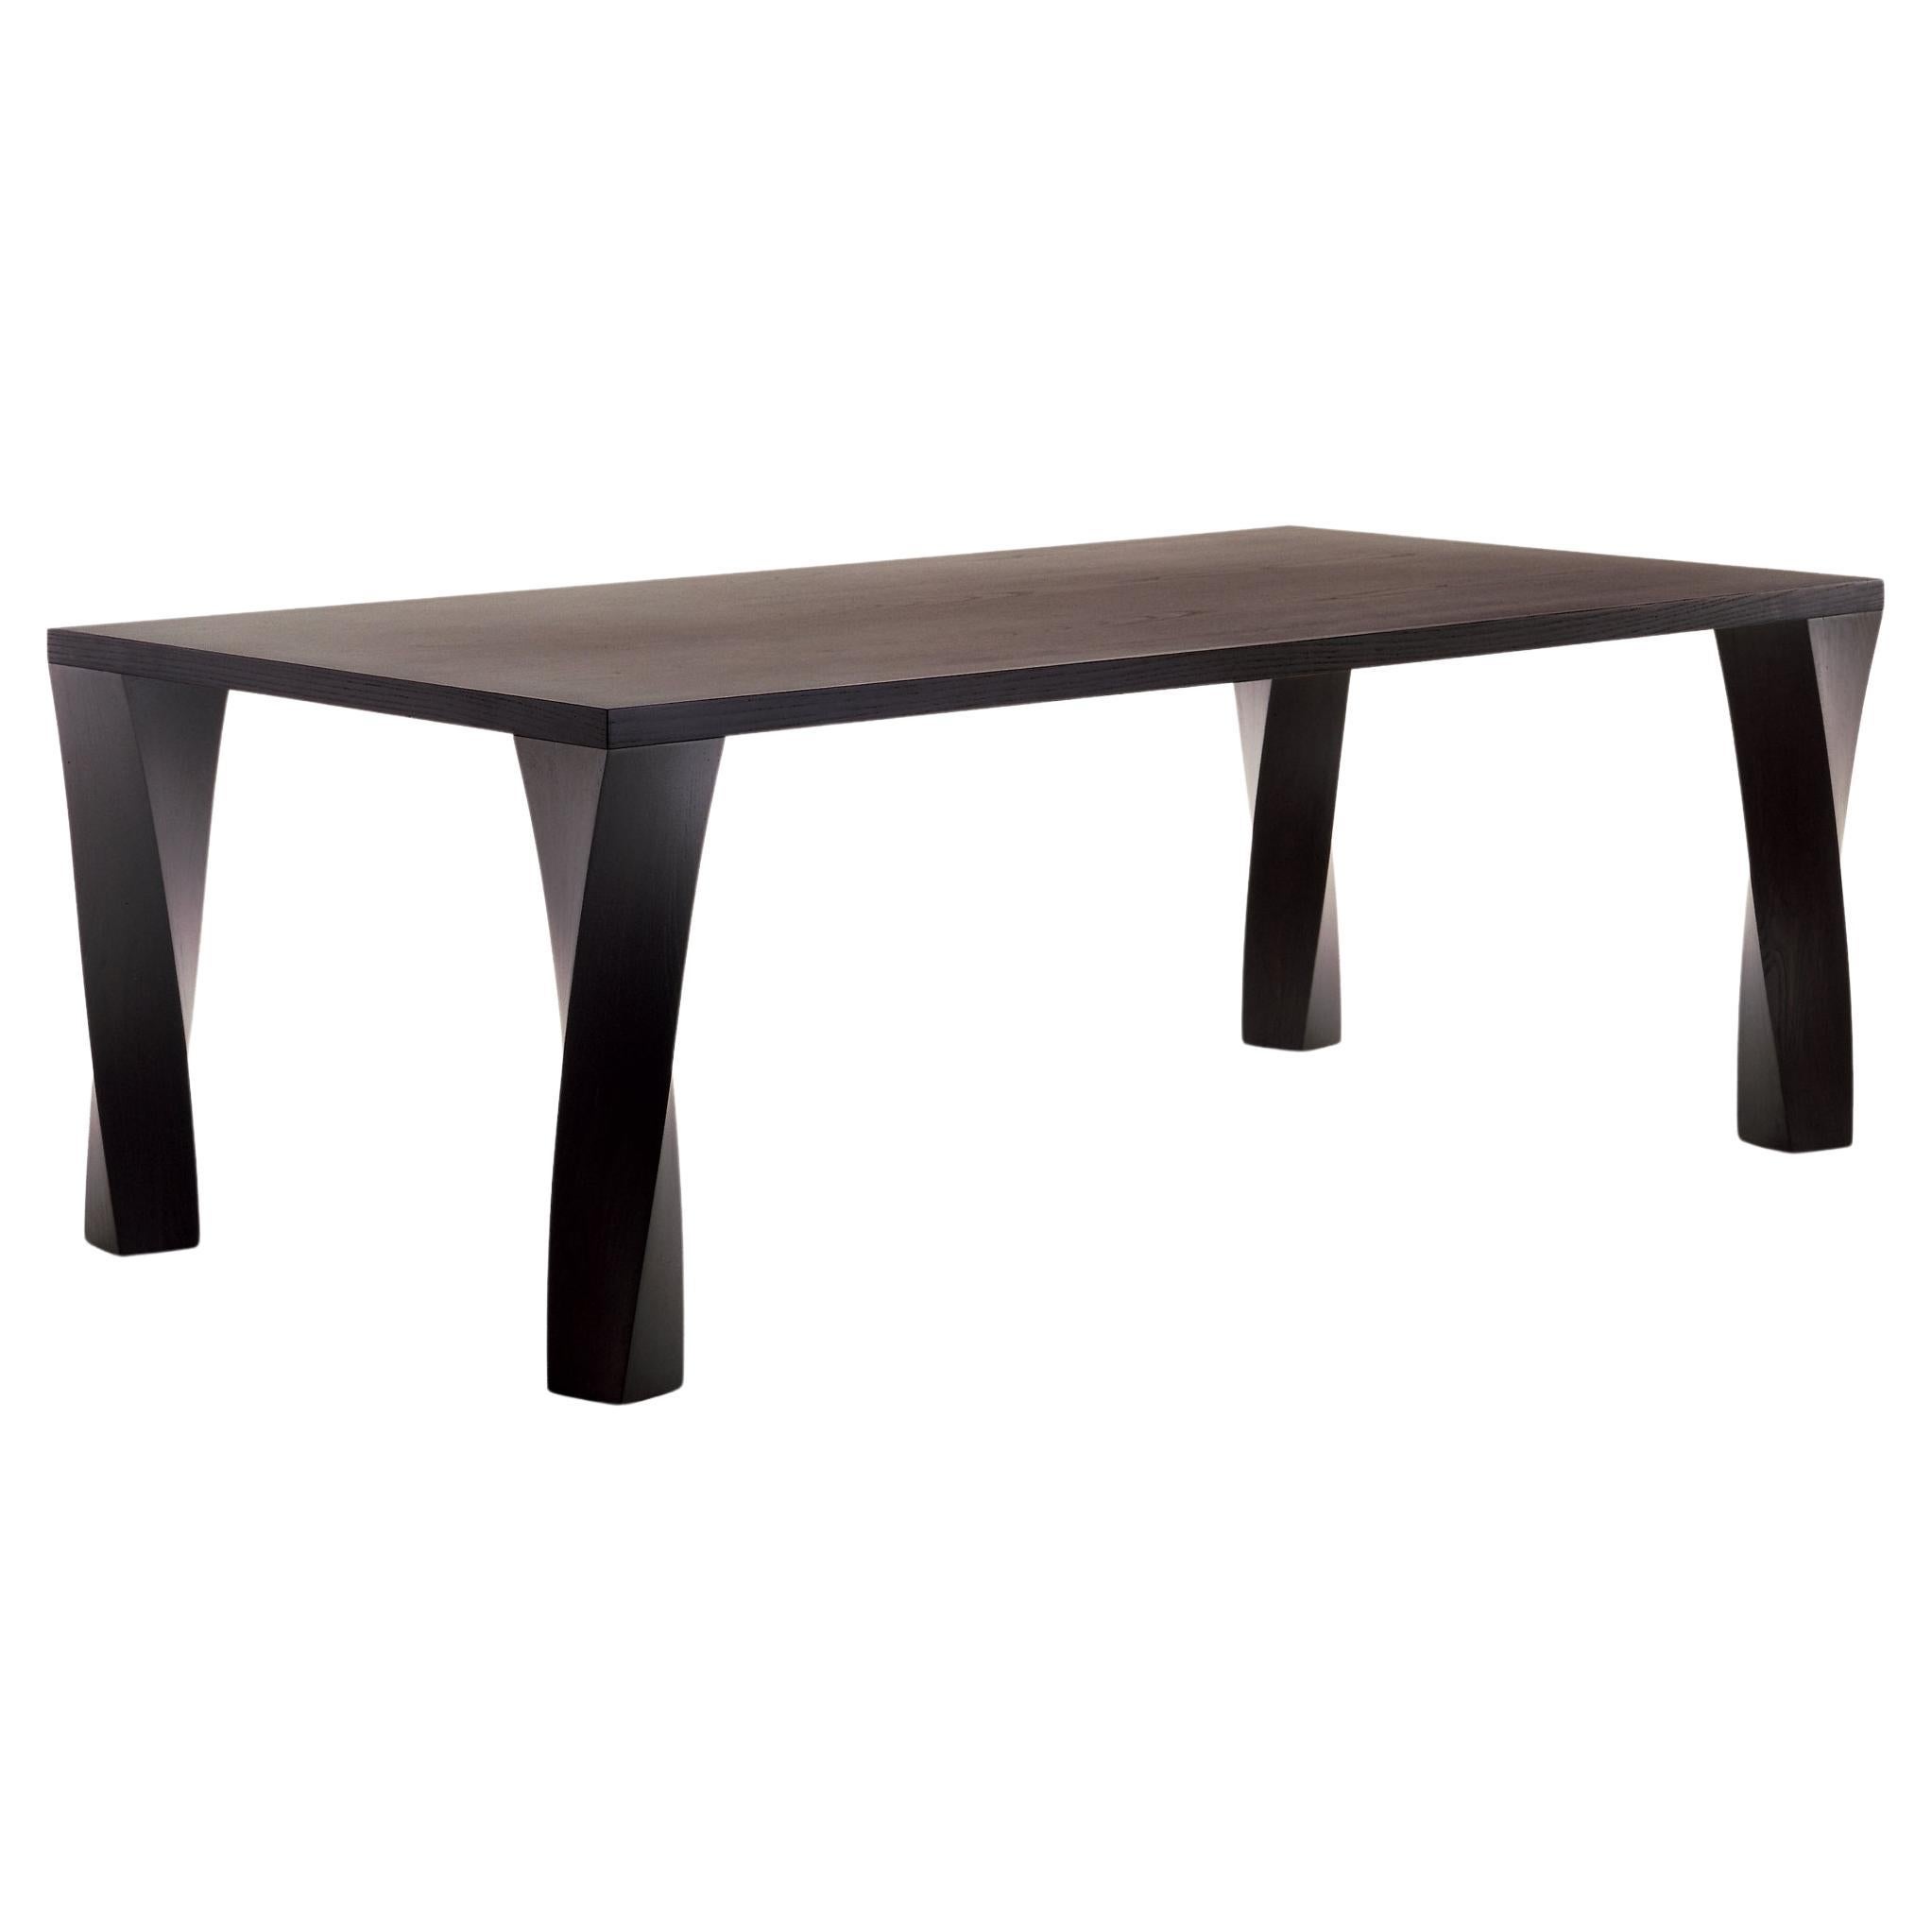 GIRACHETIRIGIRA Dining table in black stained elm with twisted legs For Sale